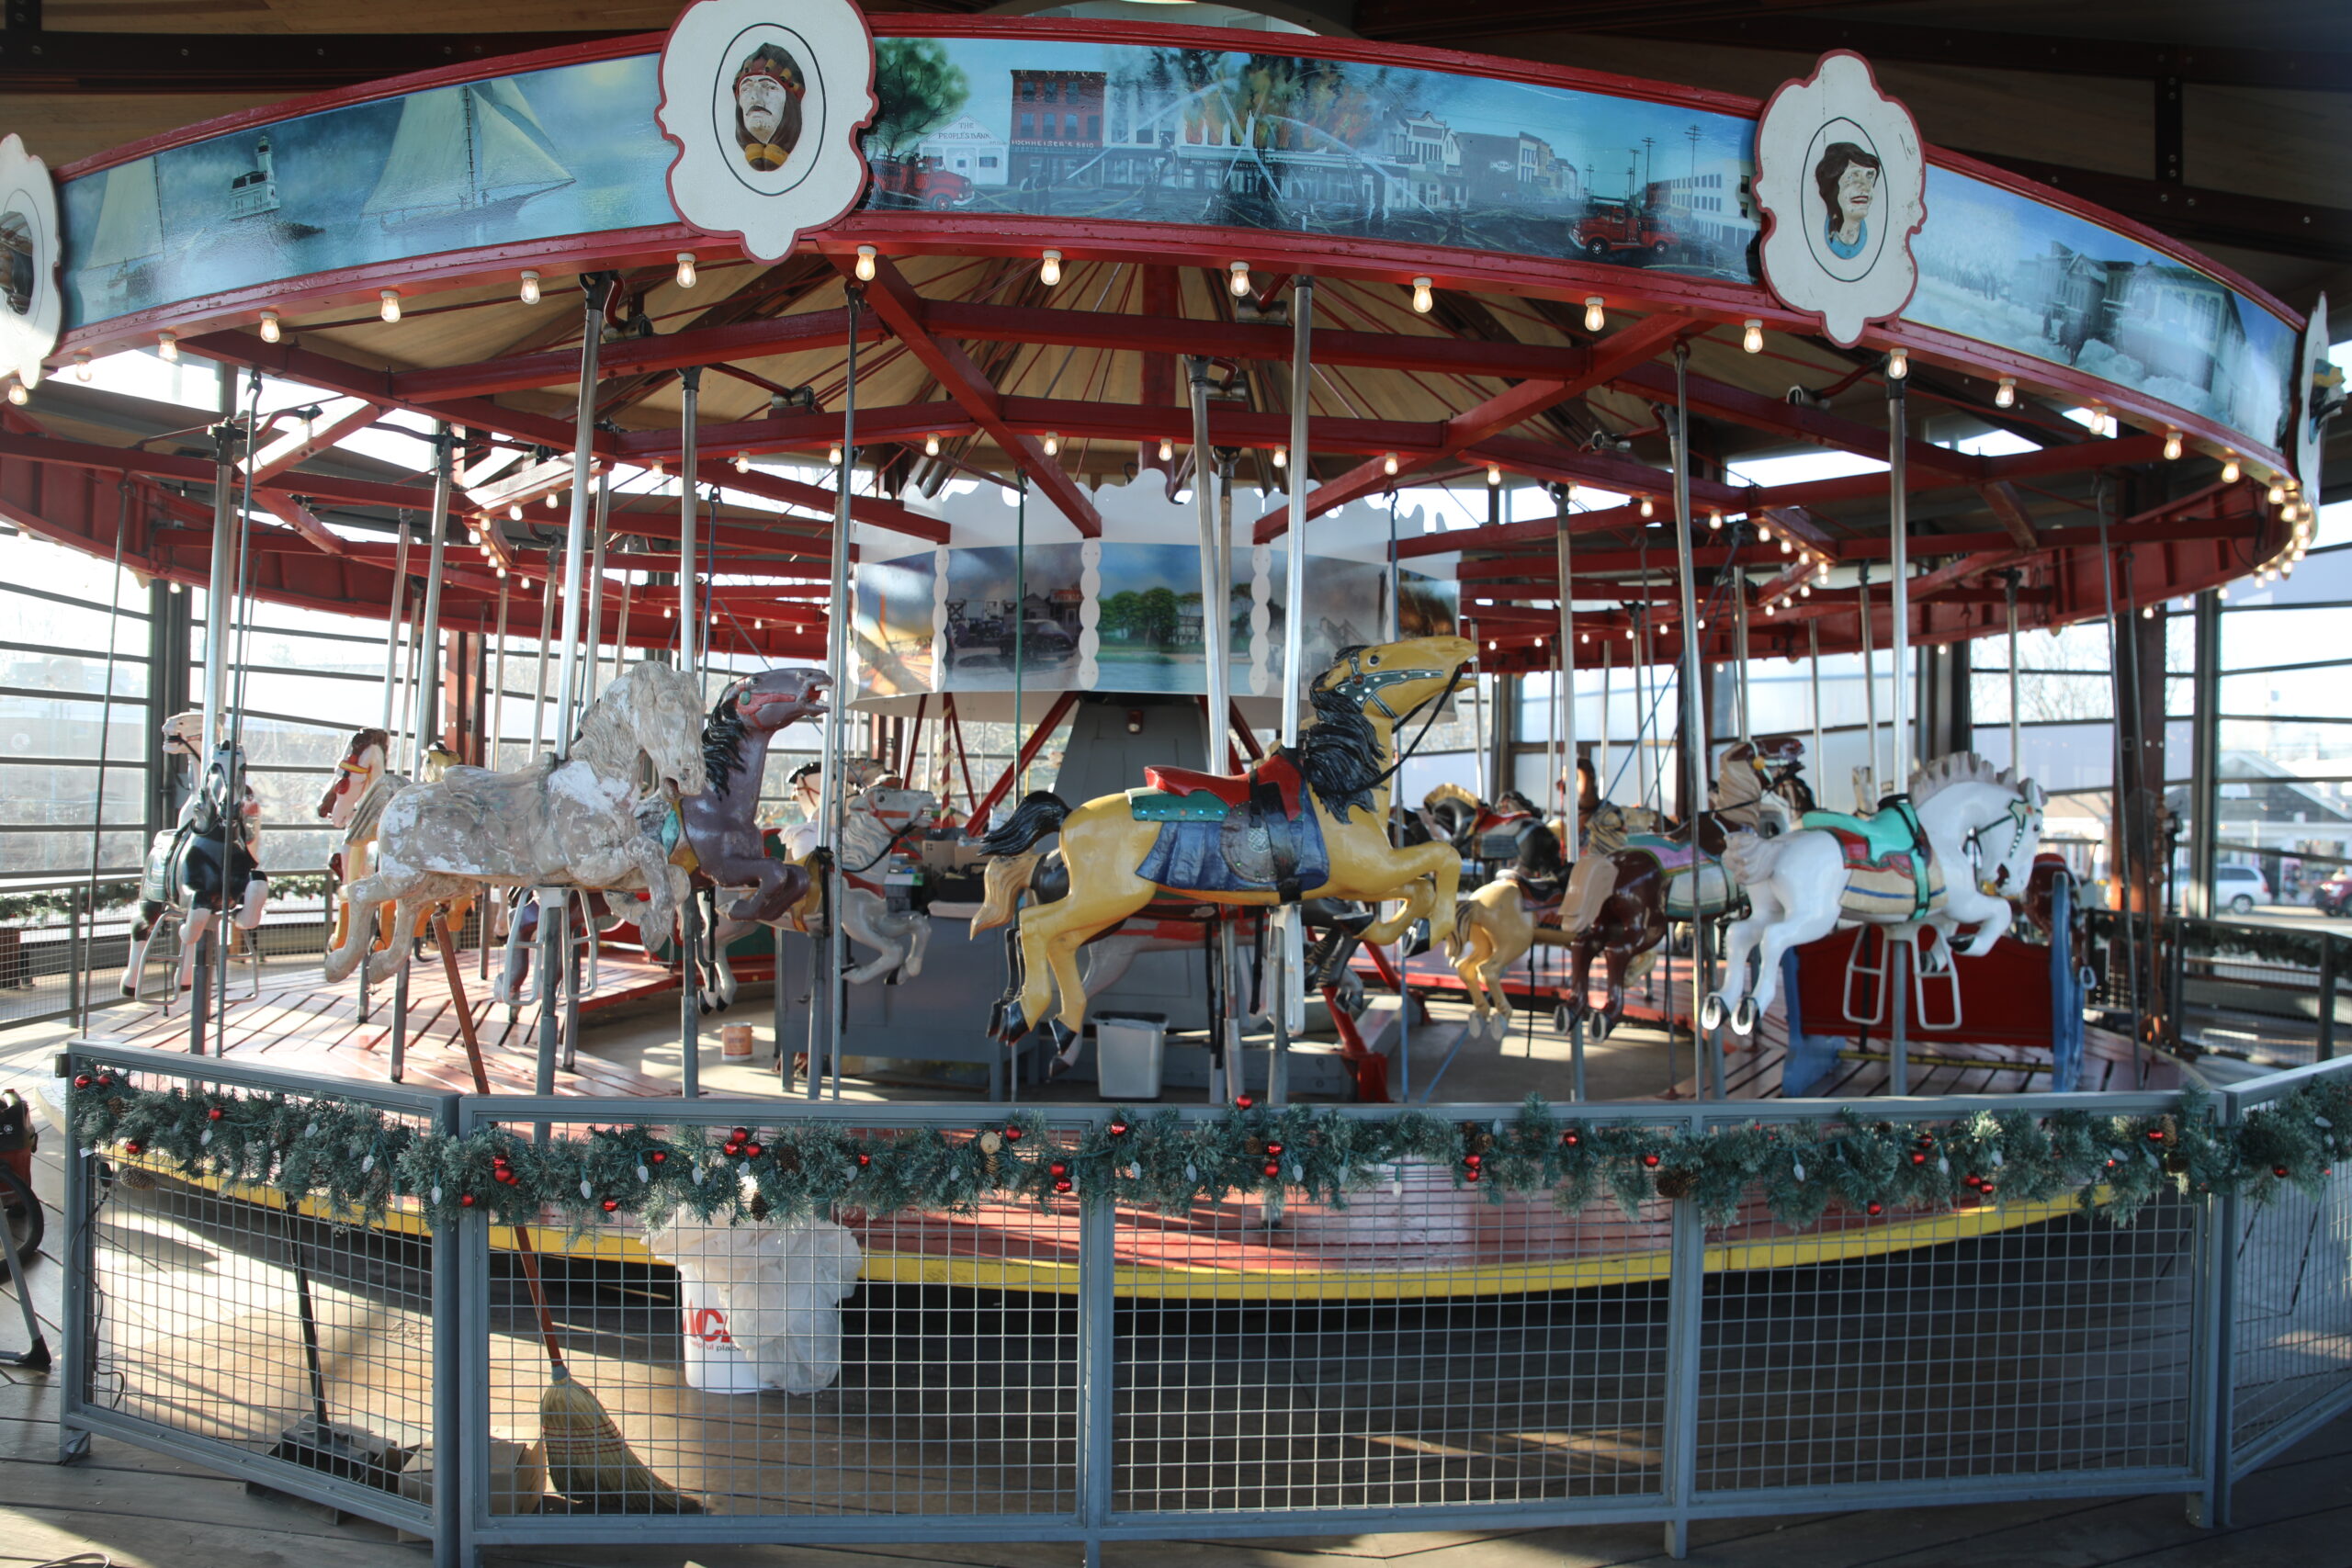 Carousel in Mitchell Park